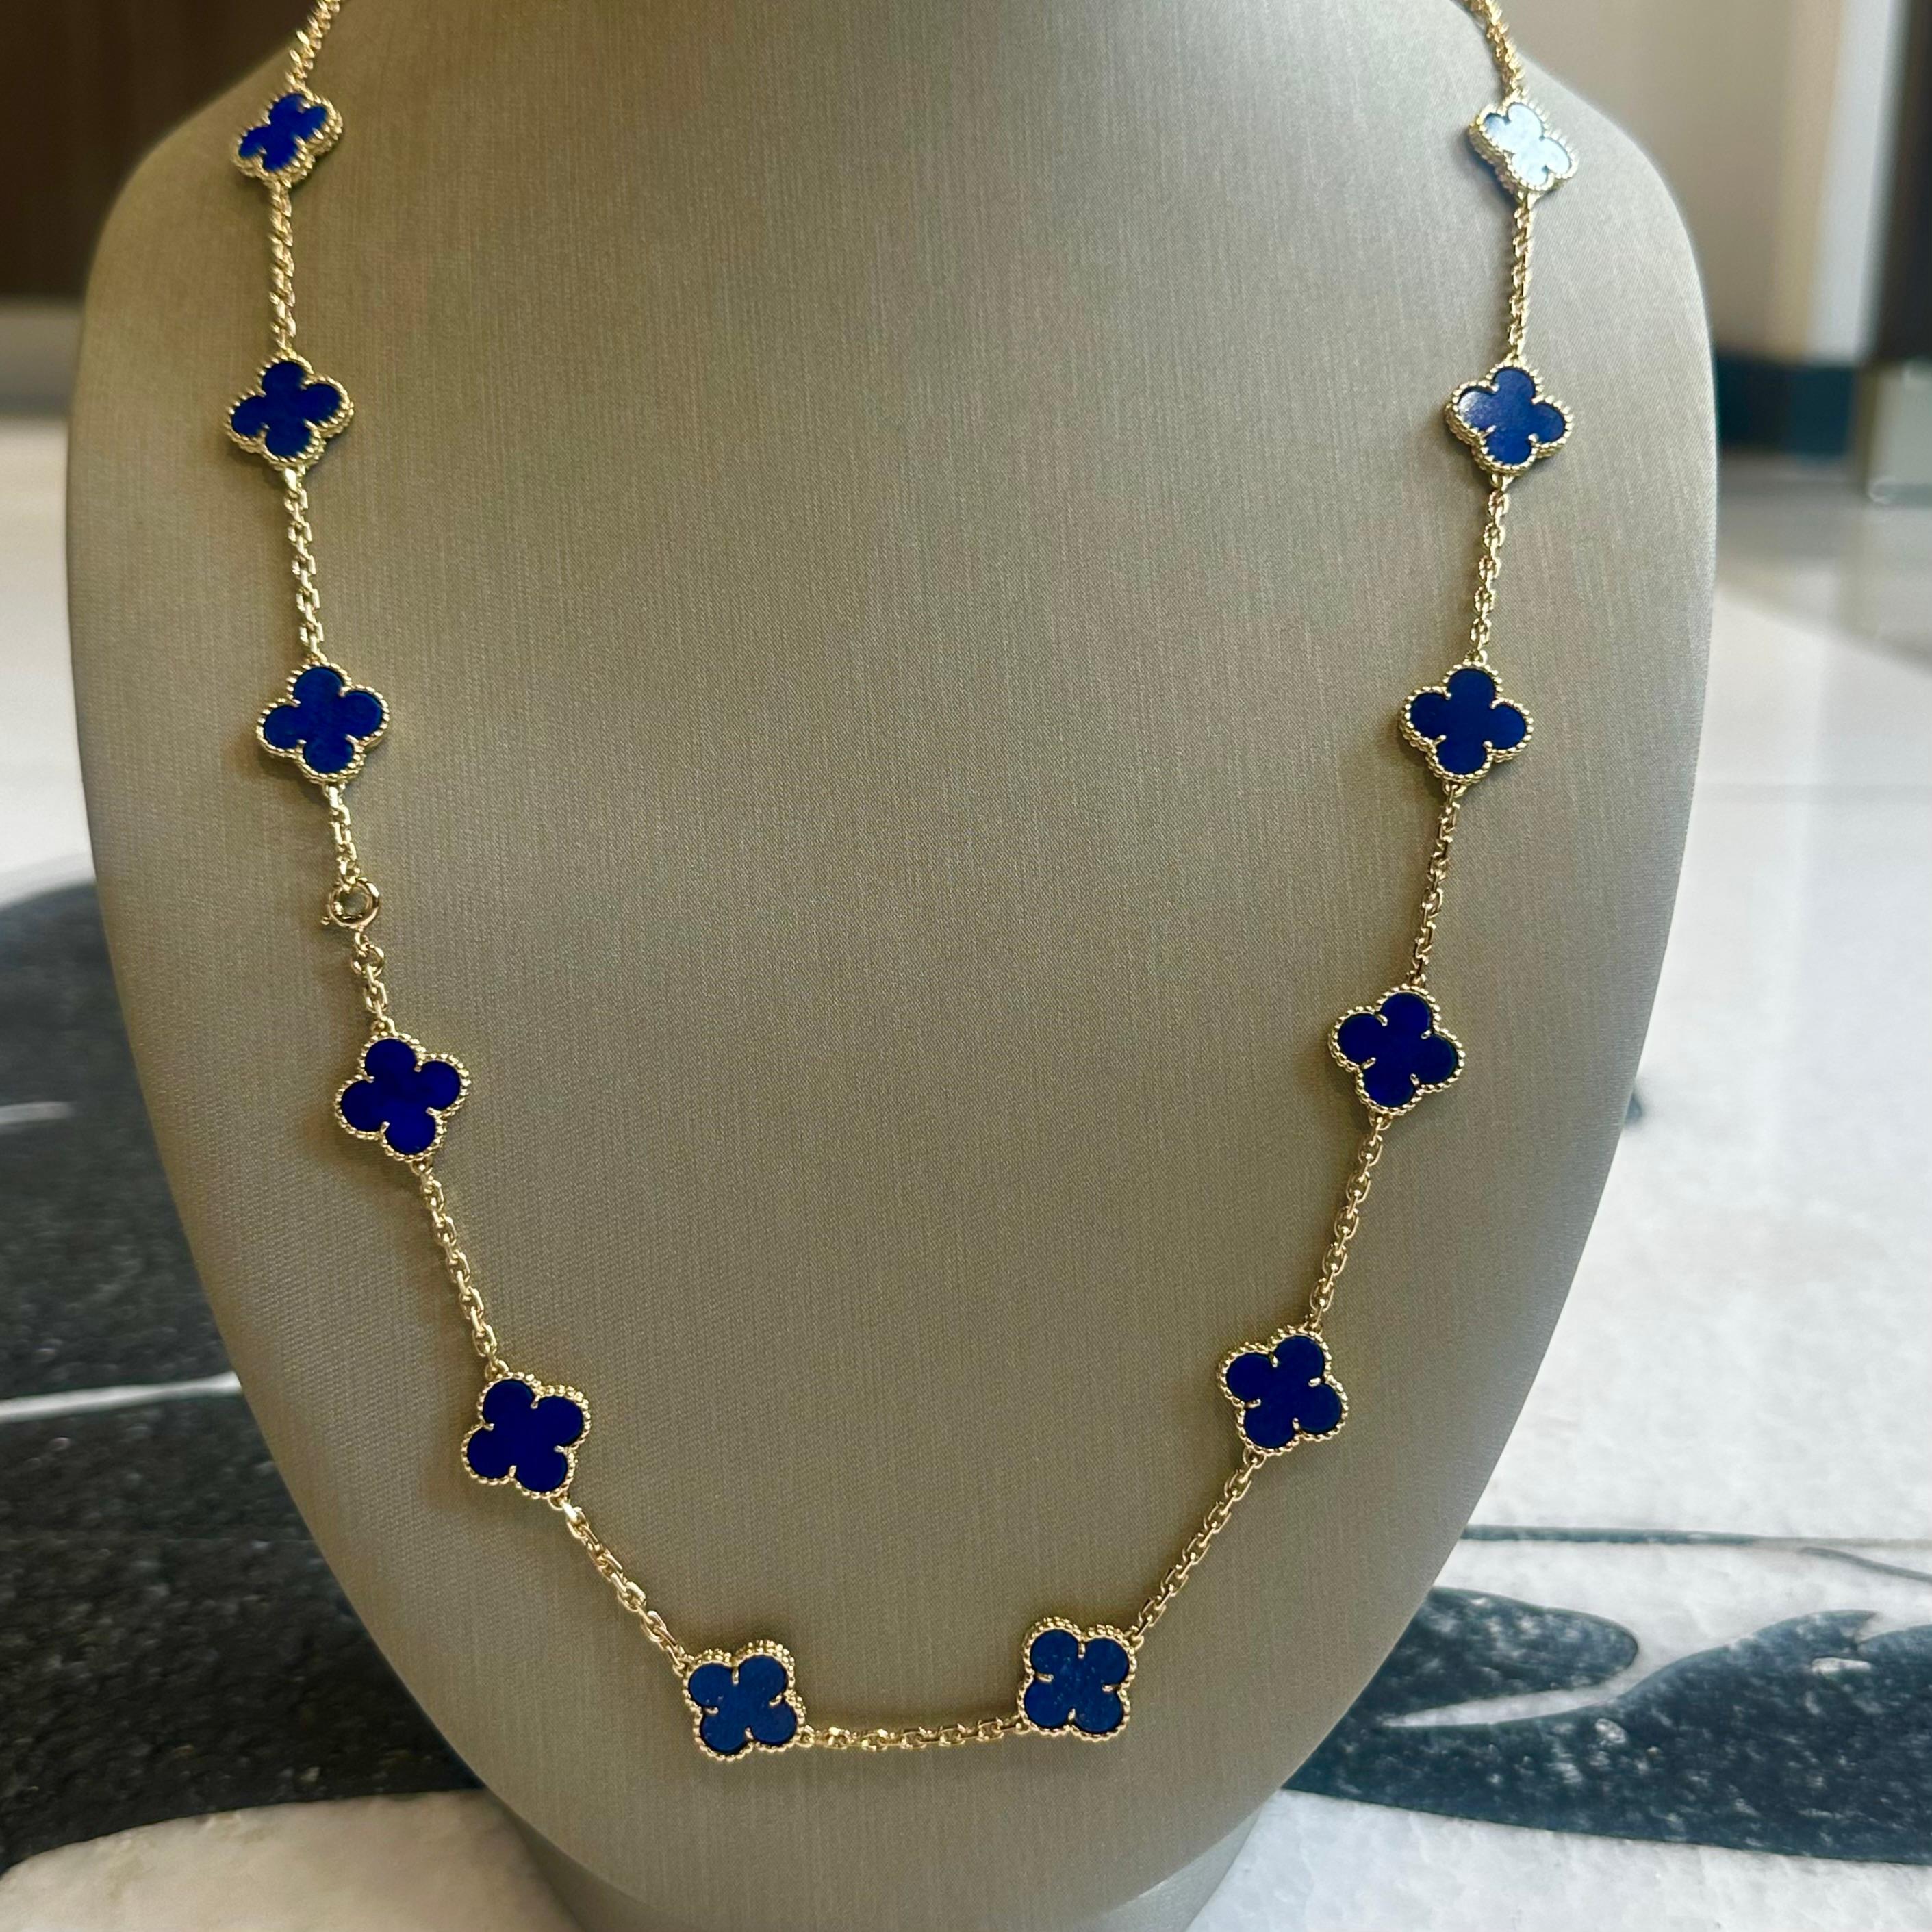 Introducing the Van Cleef & Arpels Necklace , a true collector’s piece that exude timeless elegance. Crafted with 20 exquisite Lapis Lazuli stone flower motifs, this necklace is a stunning testament to the brand’s exceptional craftsmanship. Set in